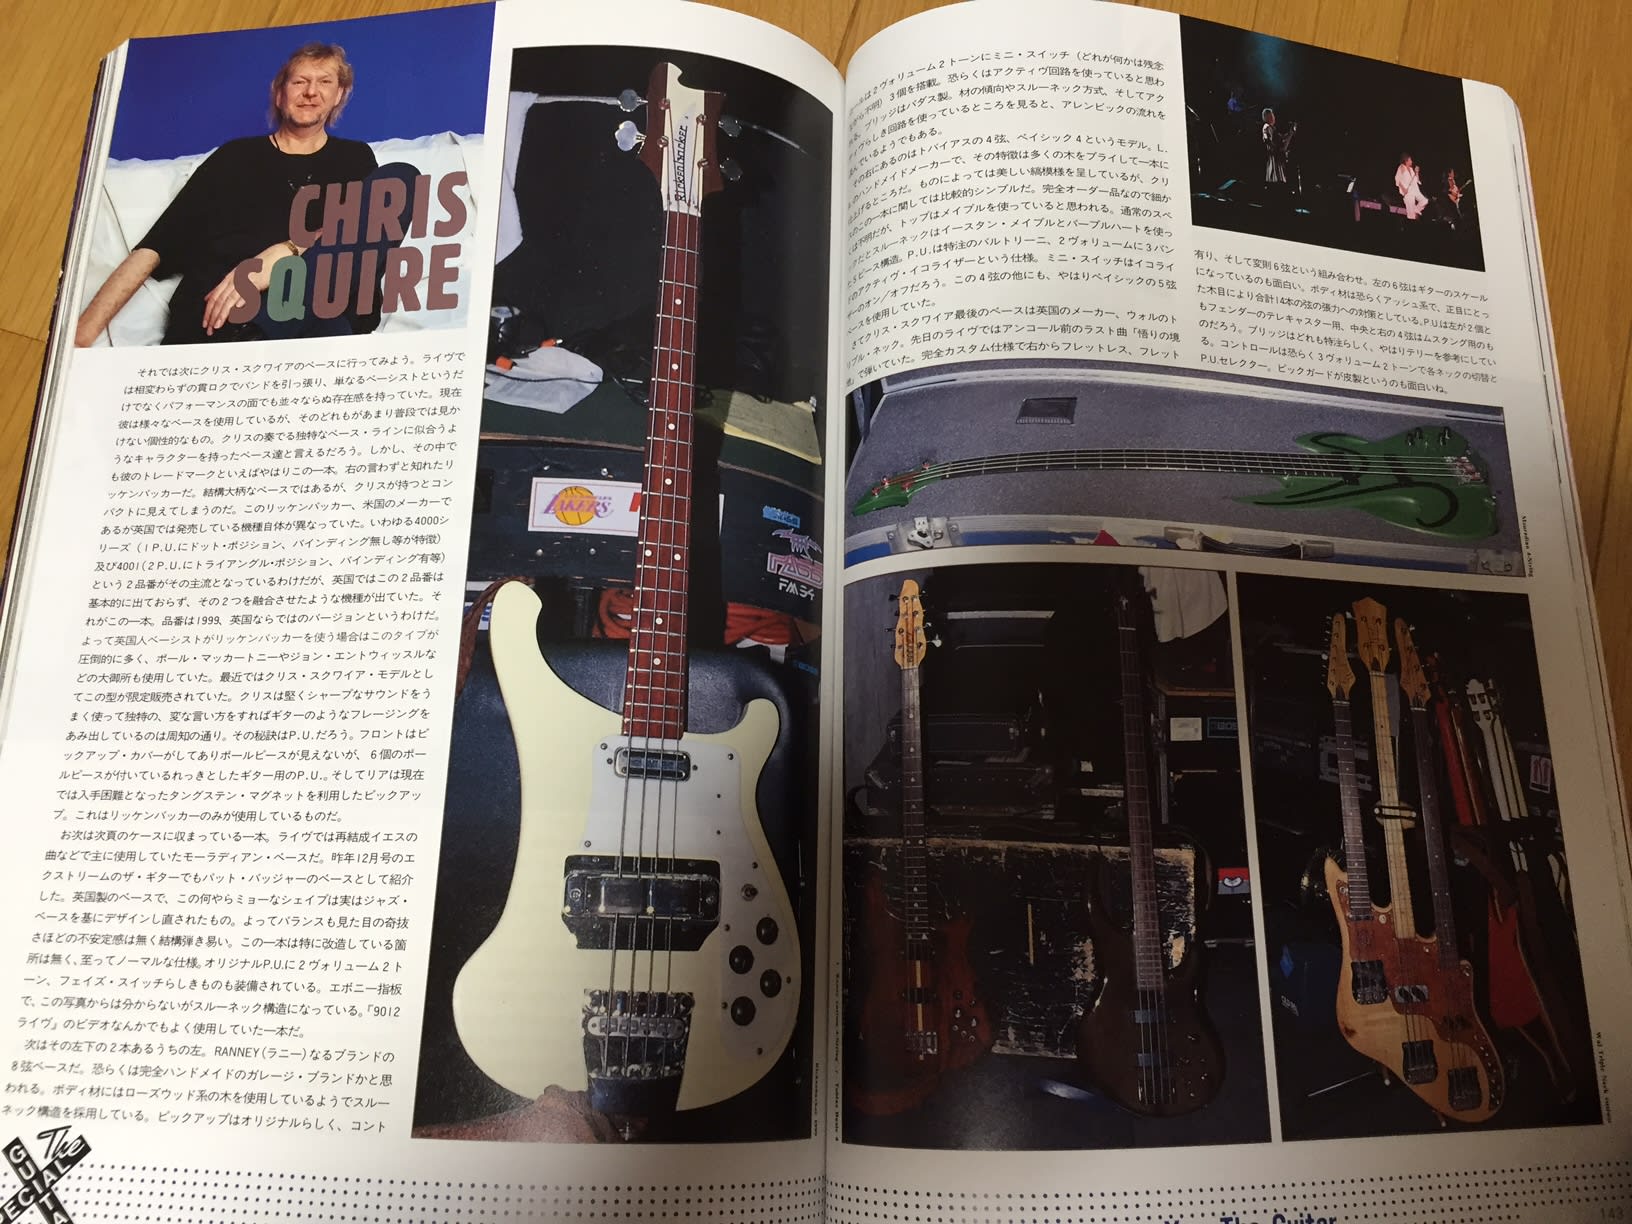 Chris Squire Player Yes The Bass The Sapporo Transit Authority S T A